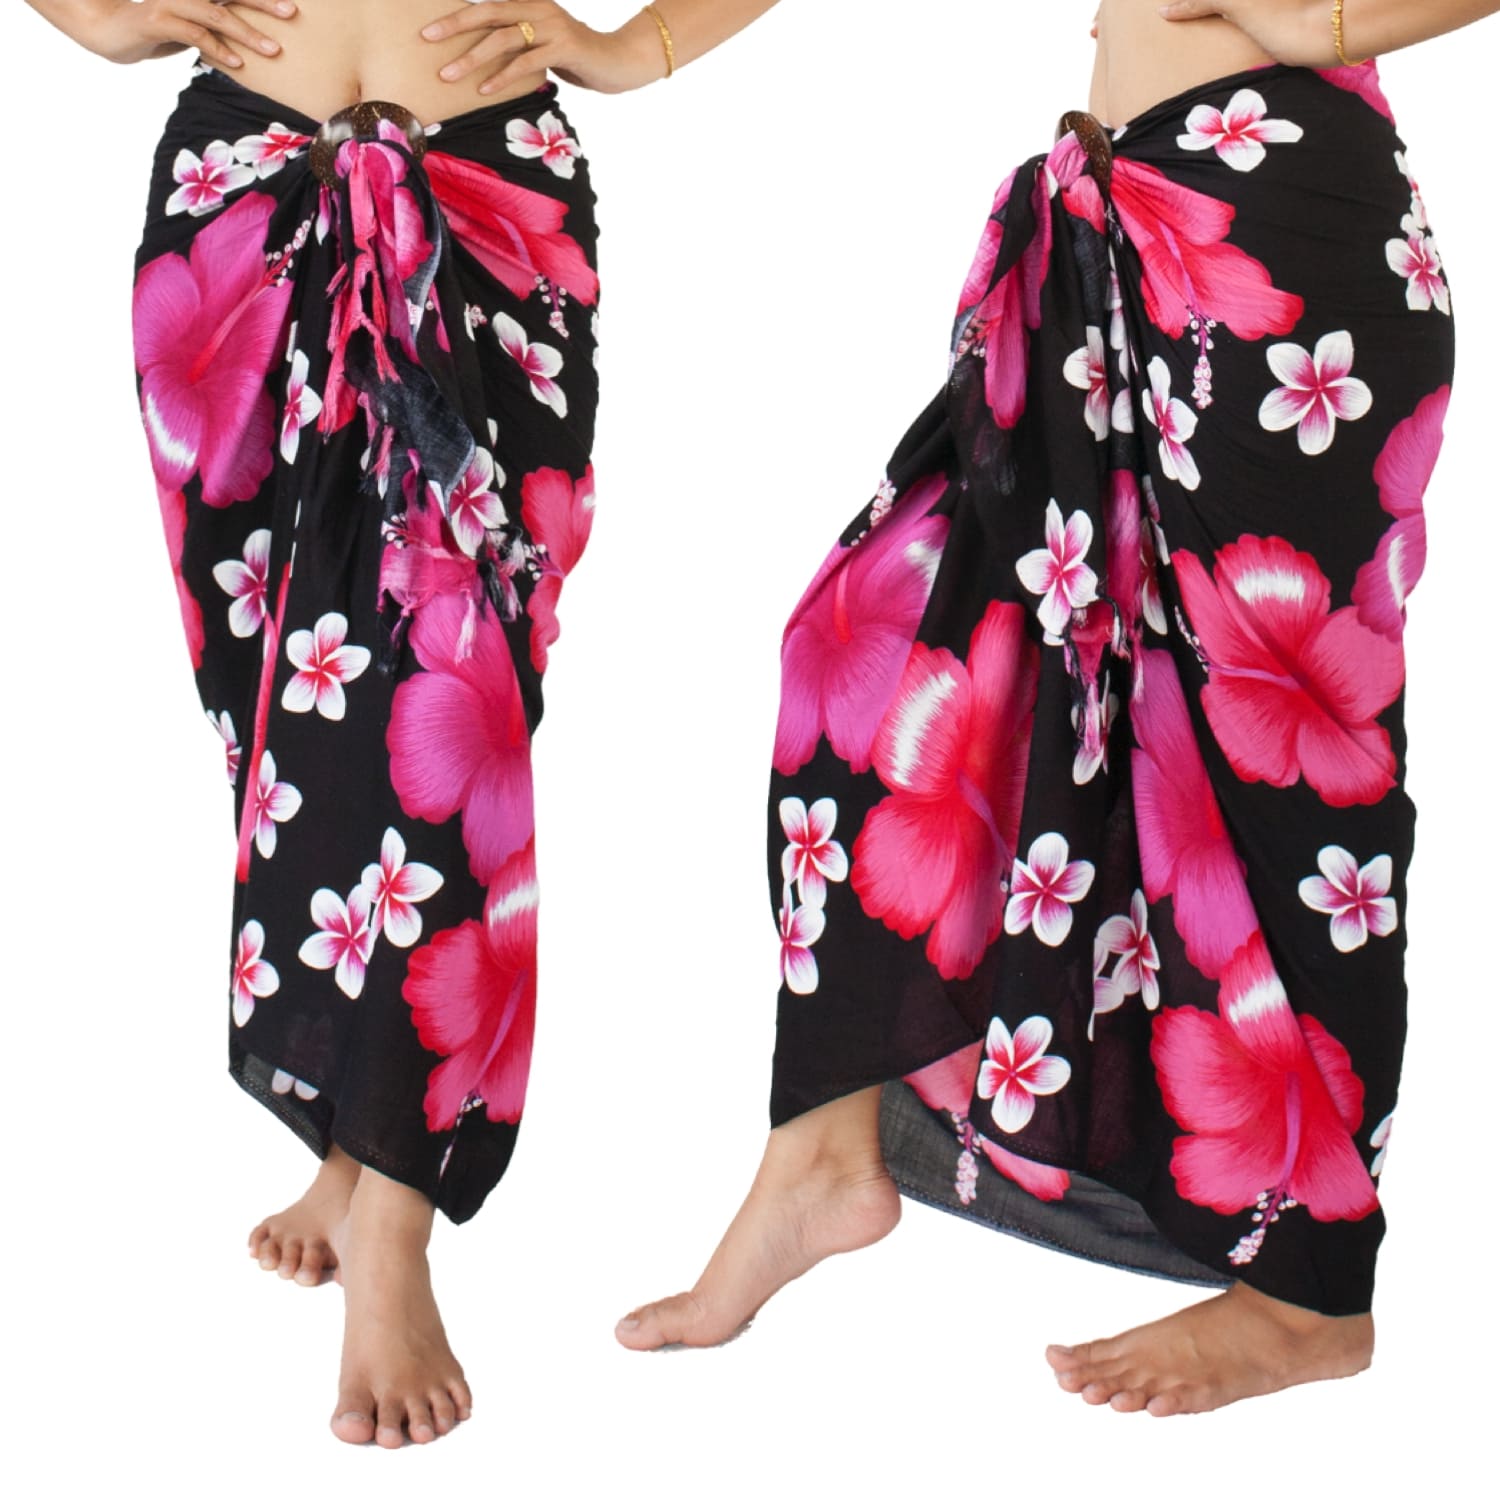 Mens Beach Wrap Hibiscus Flower/Floral Cover-Up Sarong in Black/White